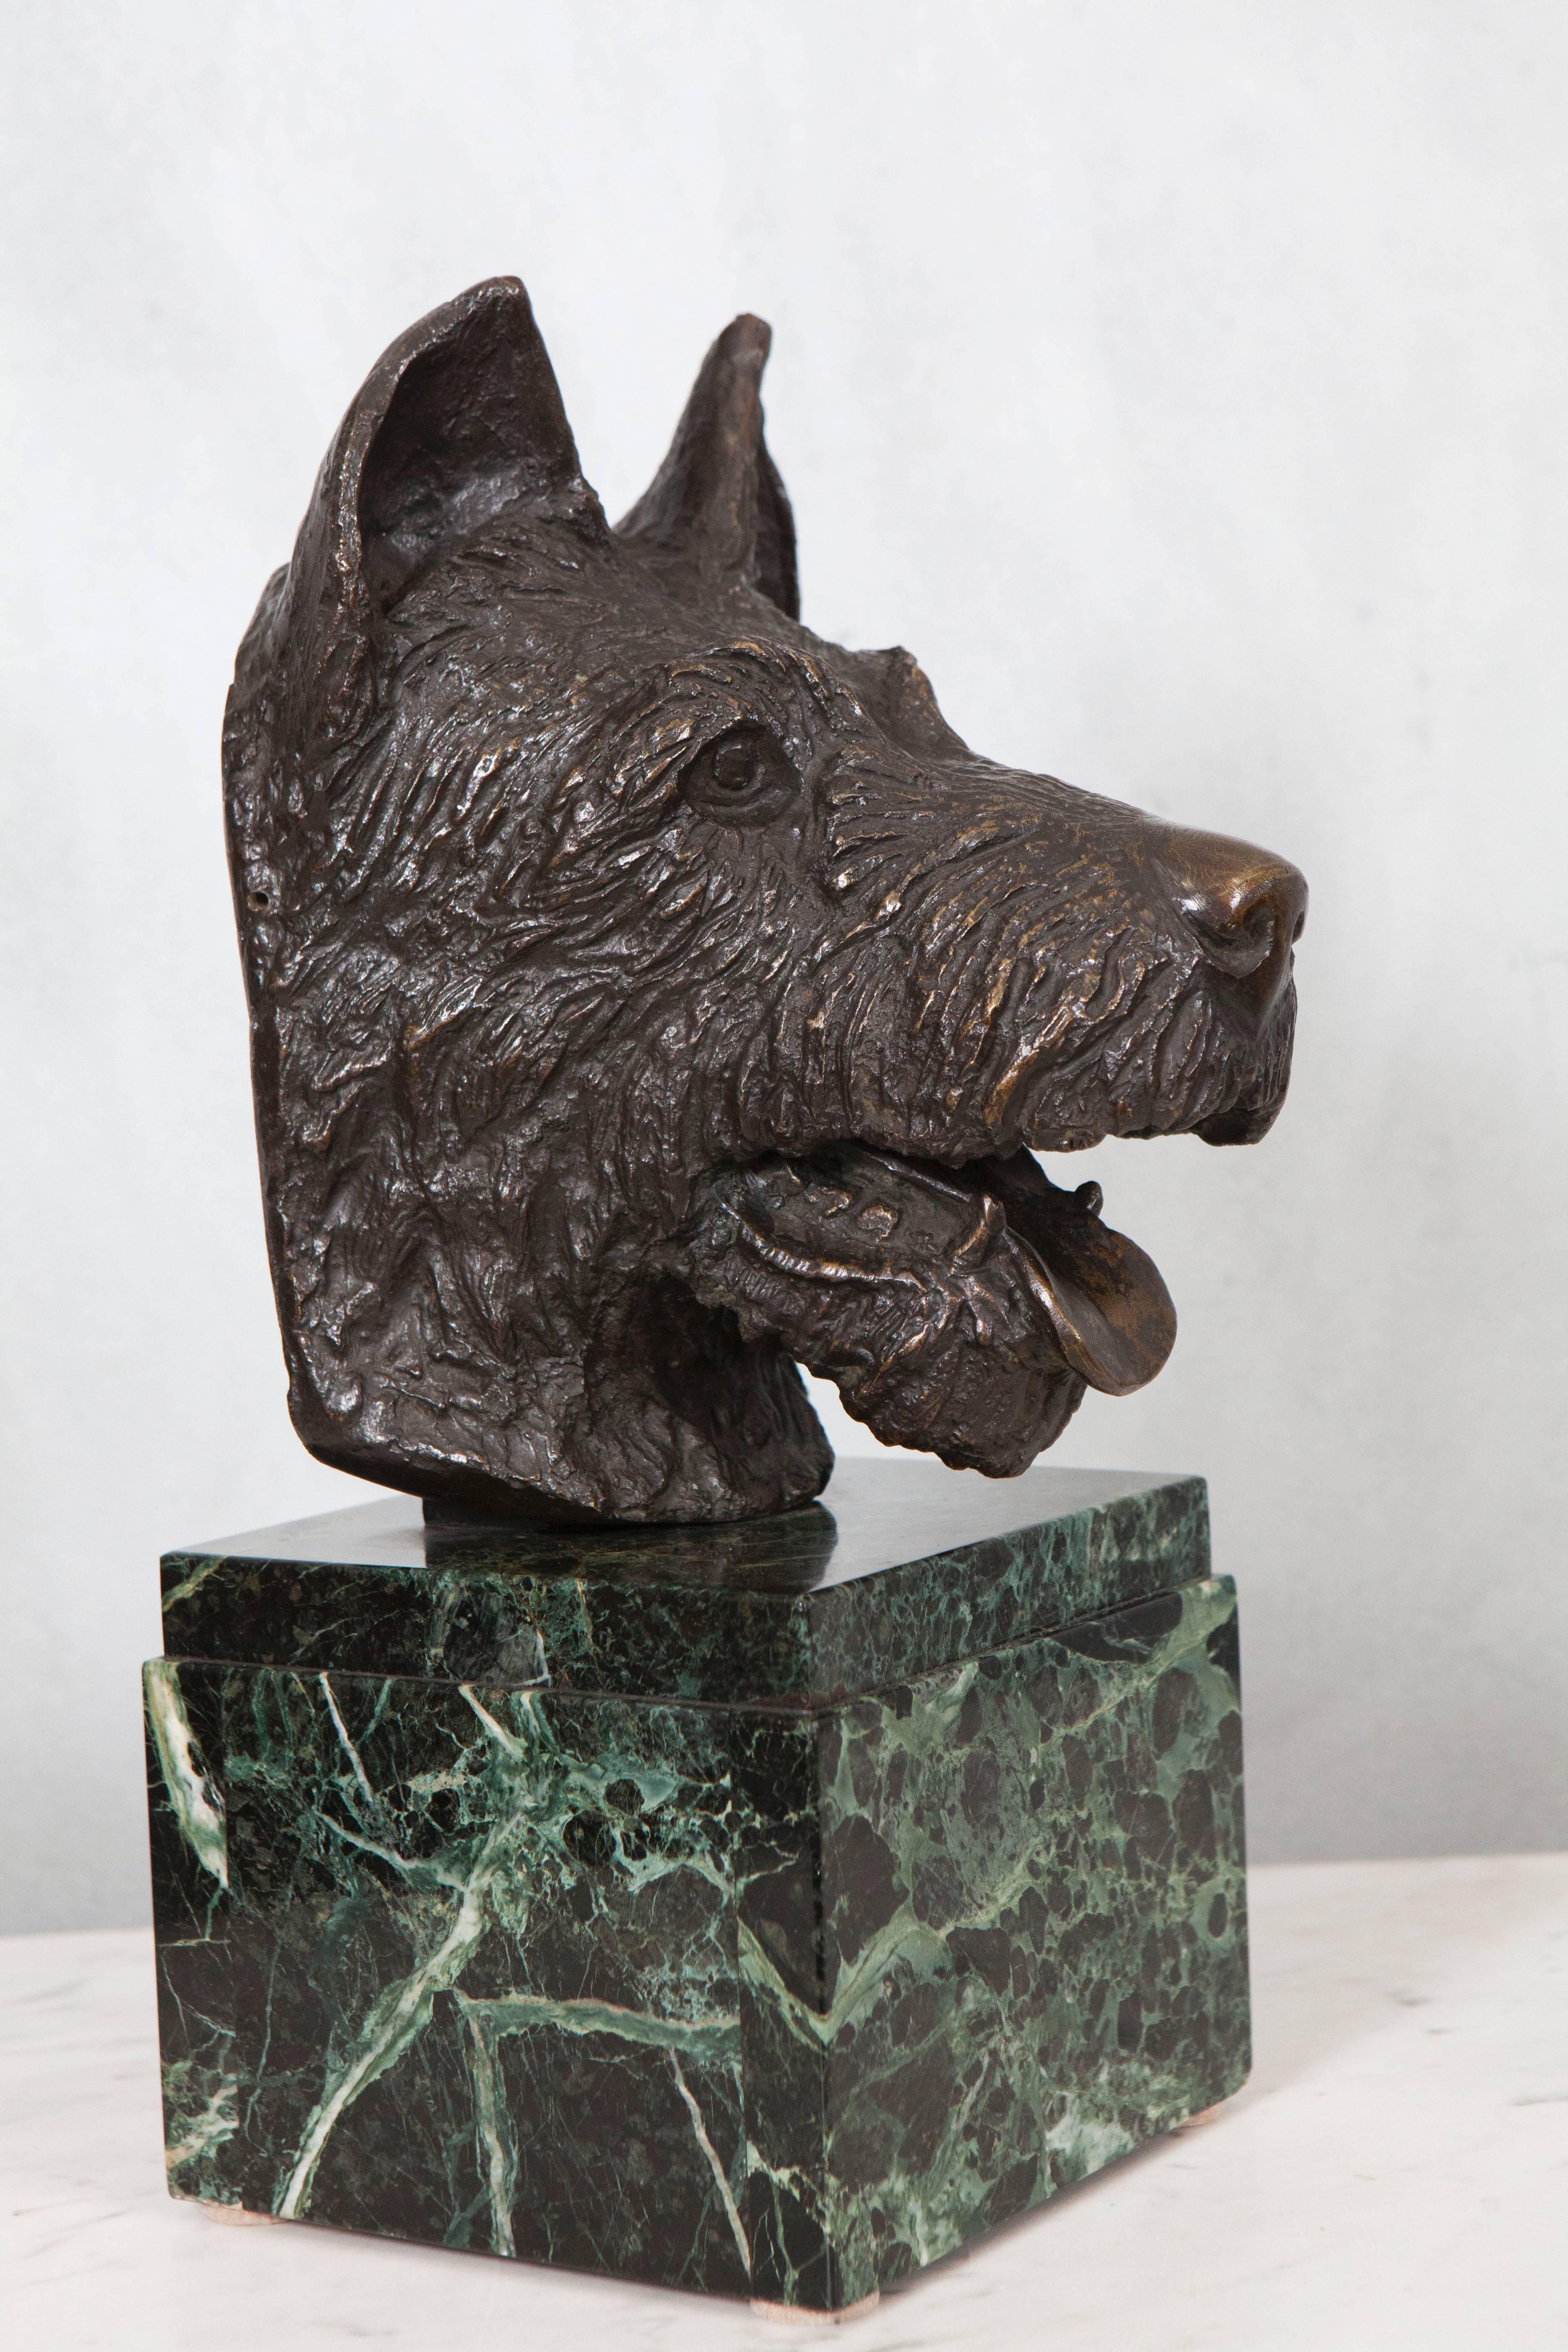 A delightful dog statue in bronze sits on a stepped marble block base. The detail of the casting and expression of the subject is something we love. This bust of a perky terrier will bring interest and delight to a variety of settings.